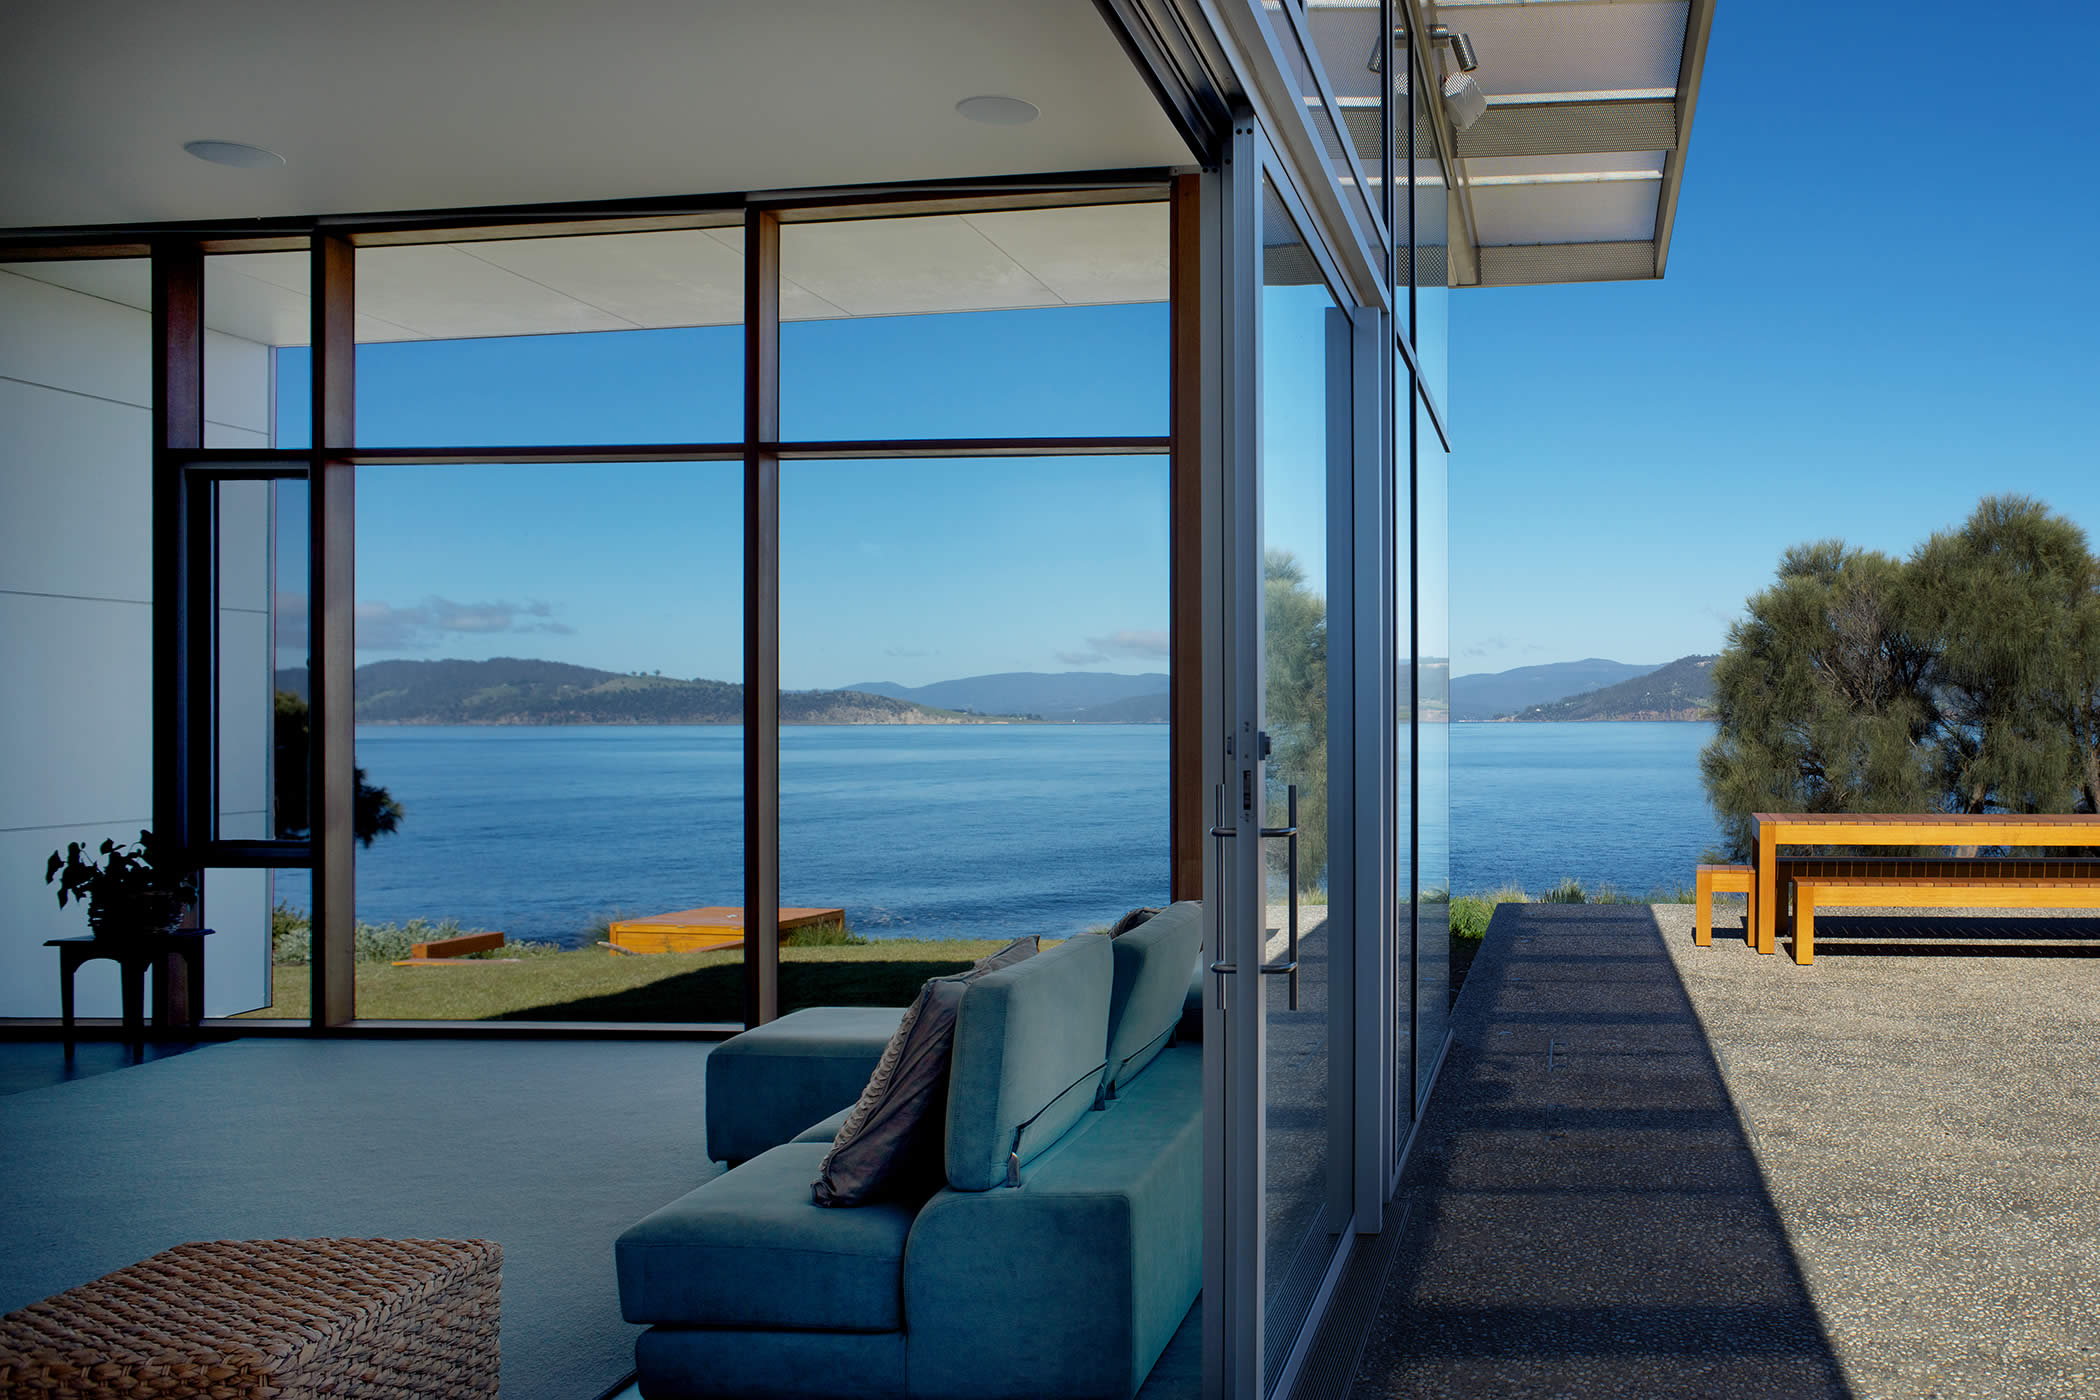 Johns Point residence, South Arm, Tasmania: The design incorporates breathtaking views, an easy indoor-outdoor relationship, flexible use, universal access, passive solar thermal comfort and sustainable energy efficiencies. Photo by Ray Joyce.